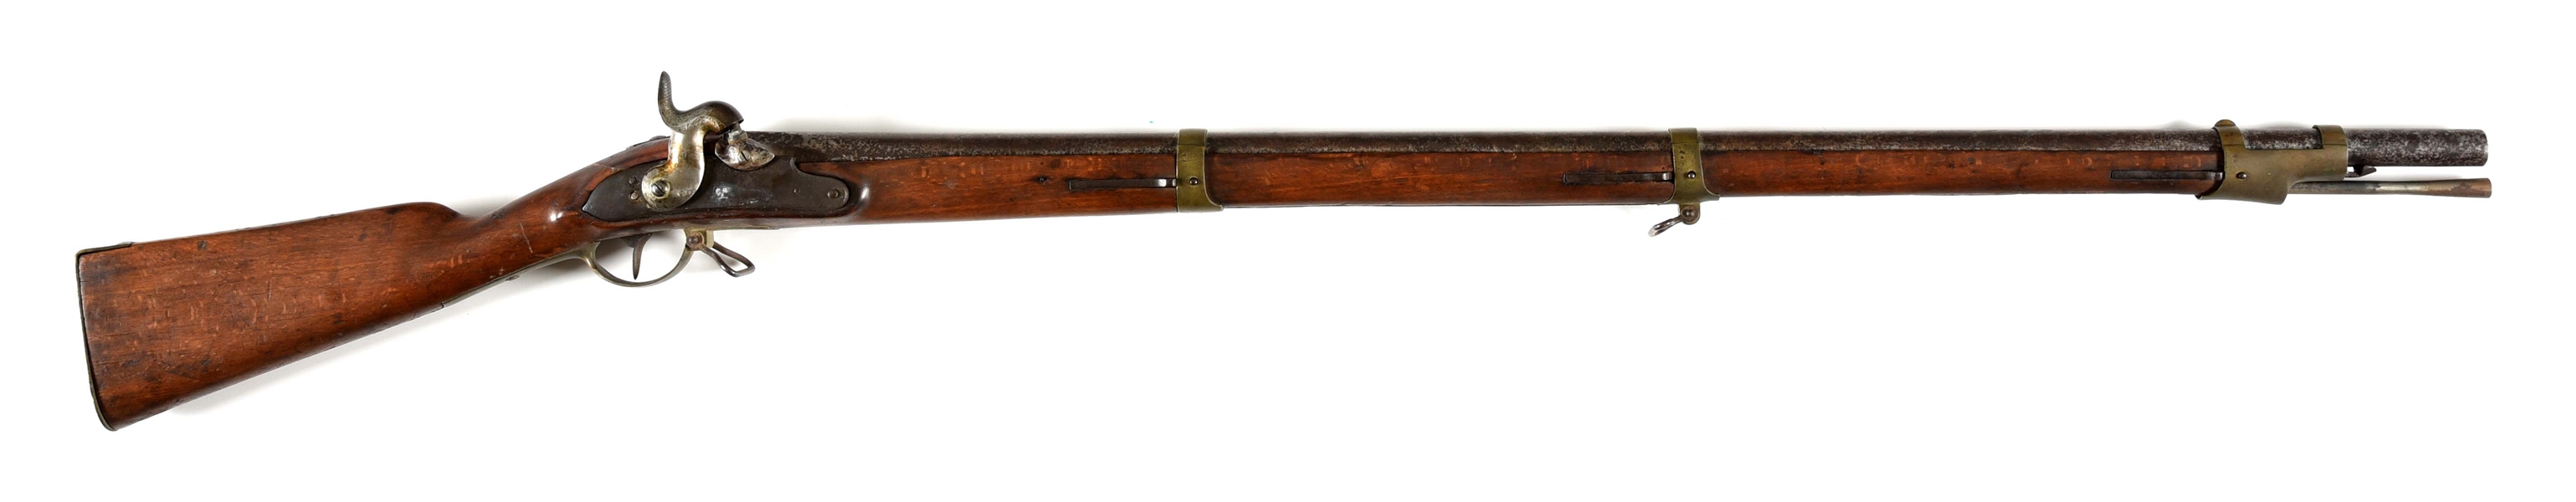 (A) CS MARKED M1809 POTSDAM PERCUSSION MUSKET.